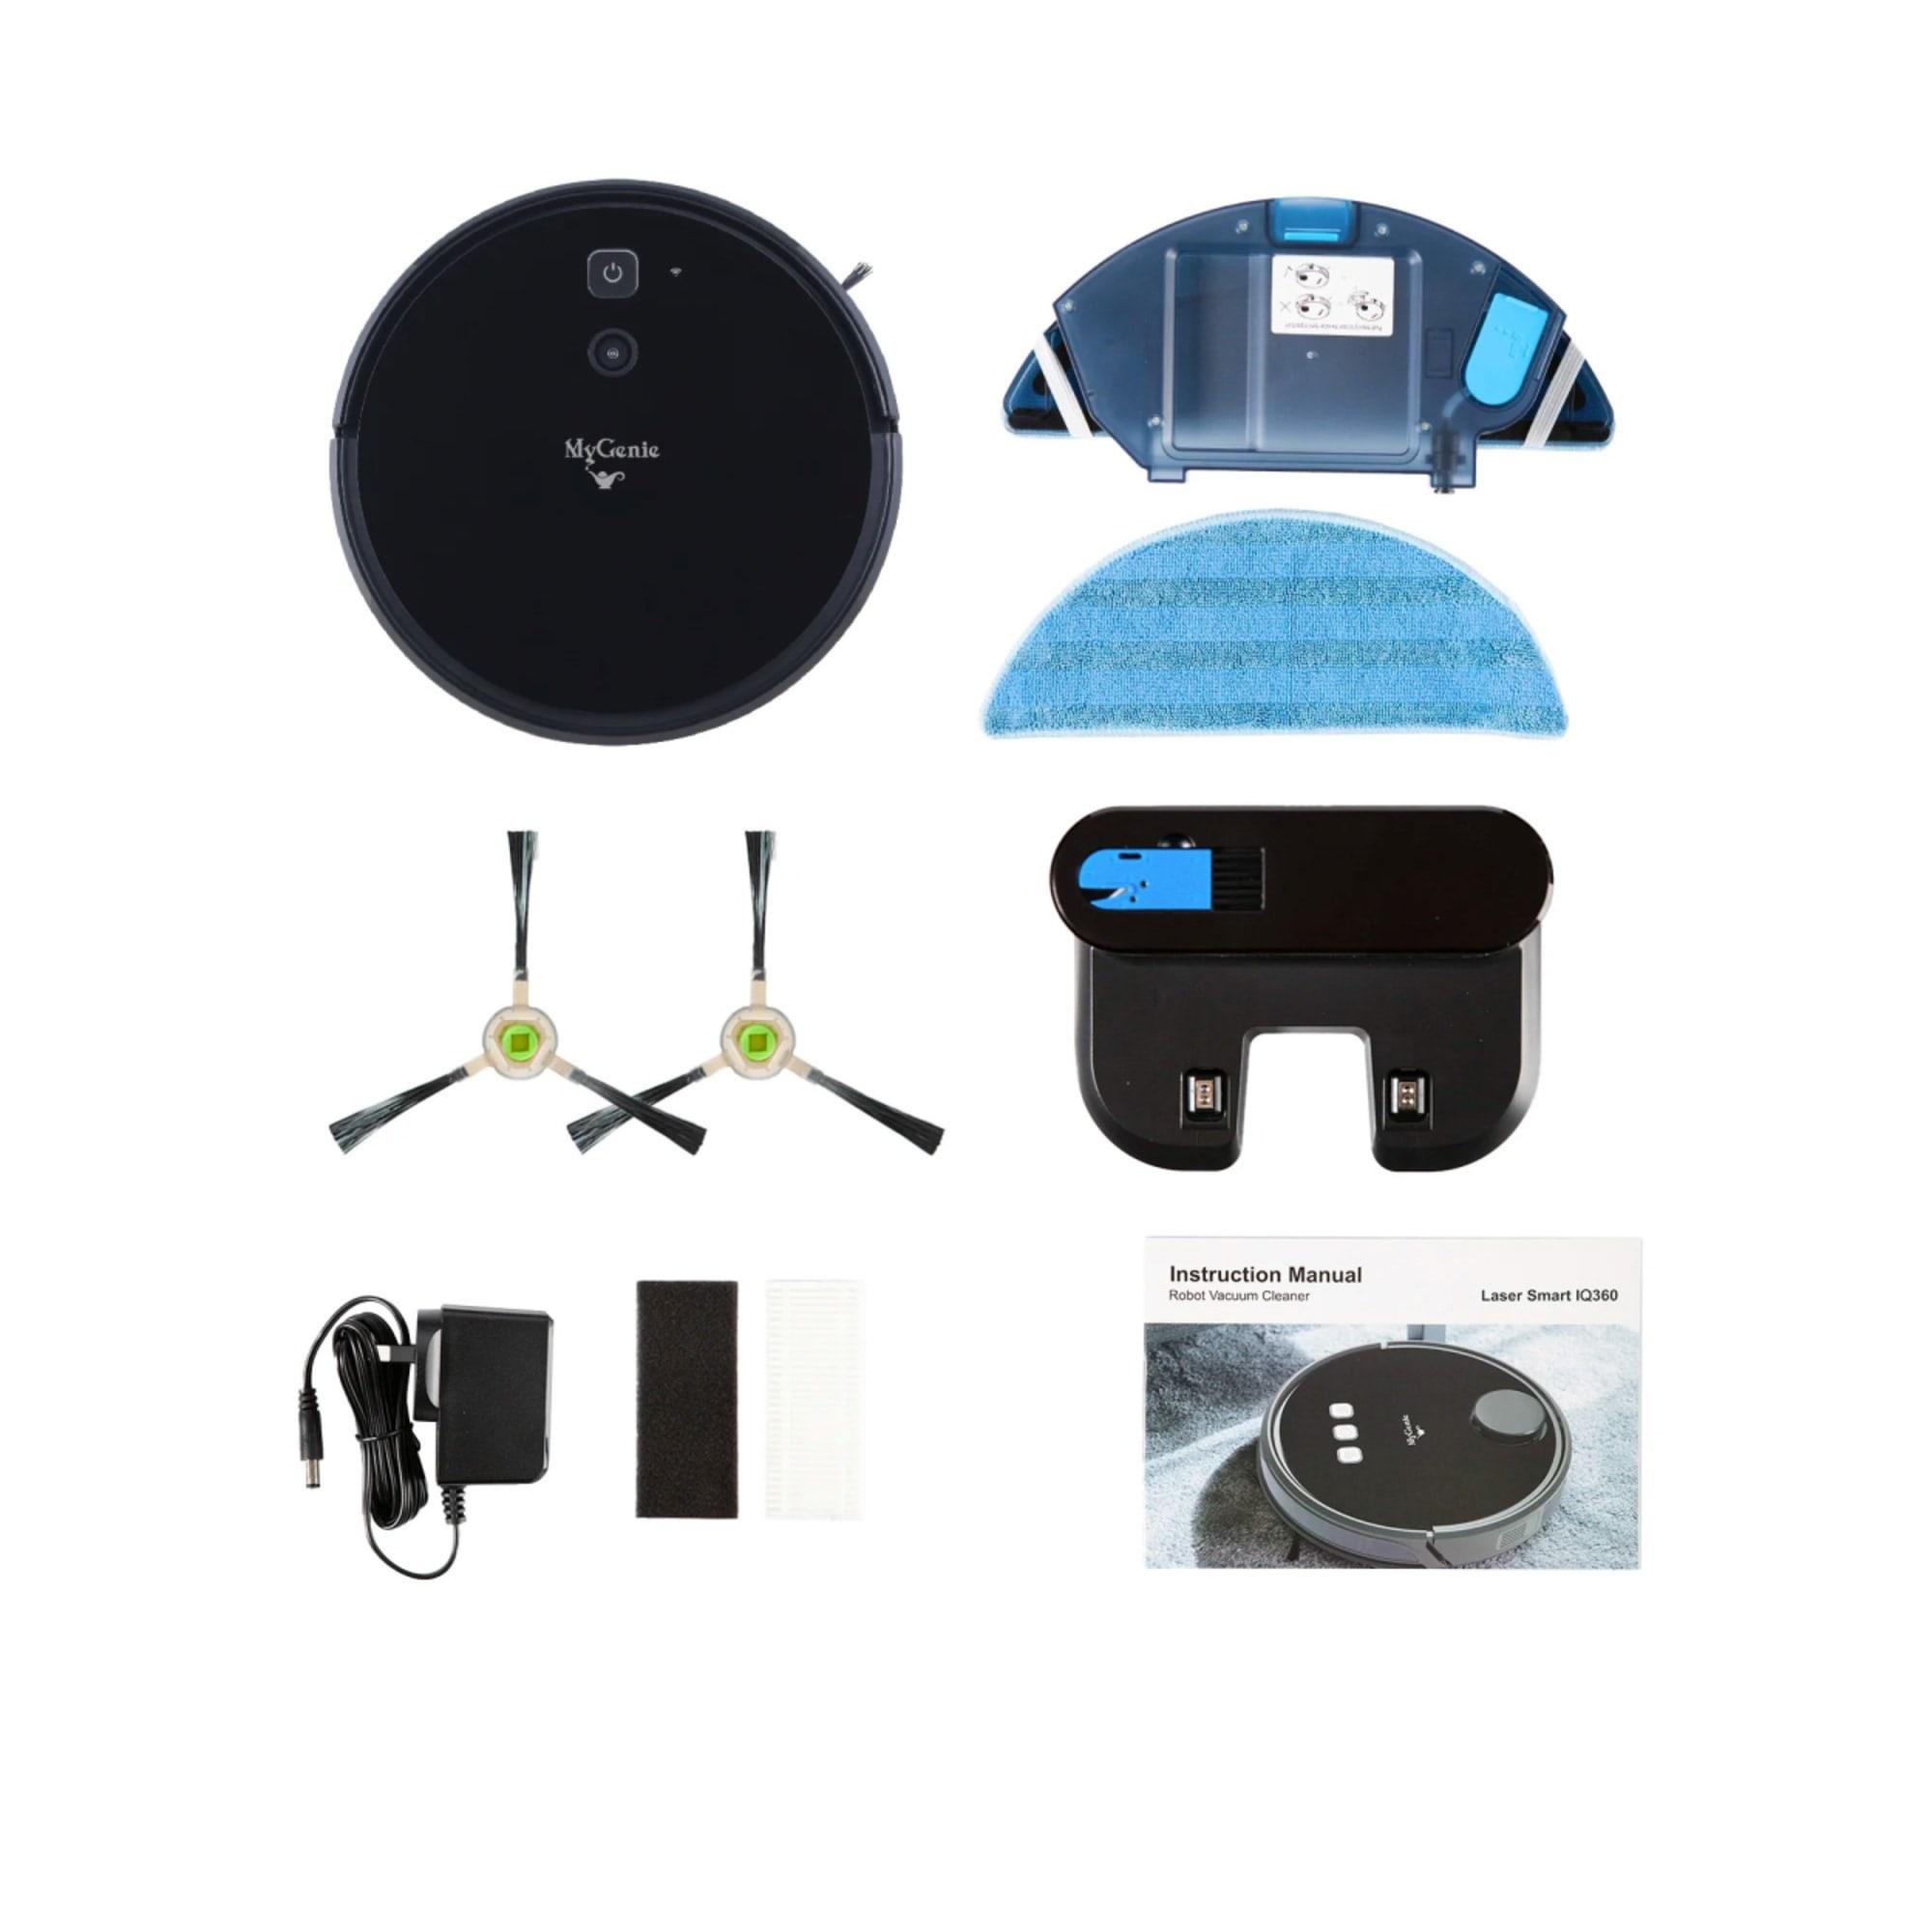 MyGenie V-Max 3000 Robotic Vacuum Cleaner with Wi-Fi Black Image 6